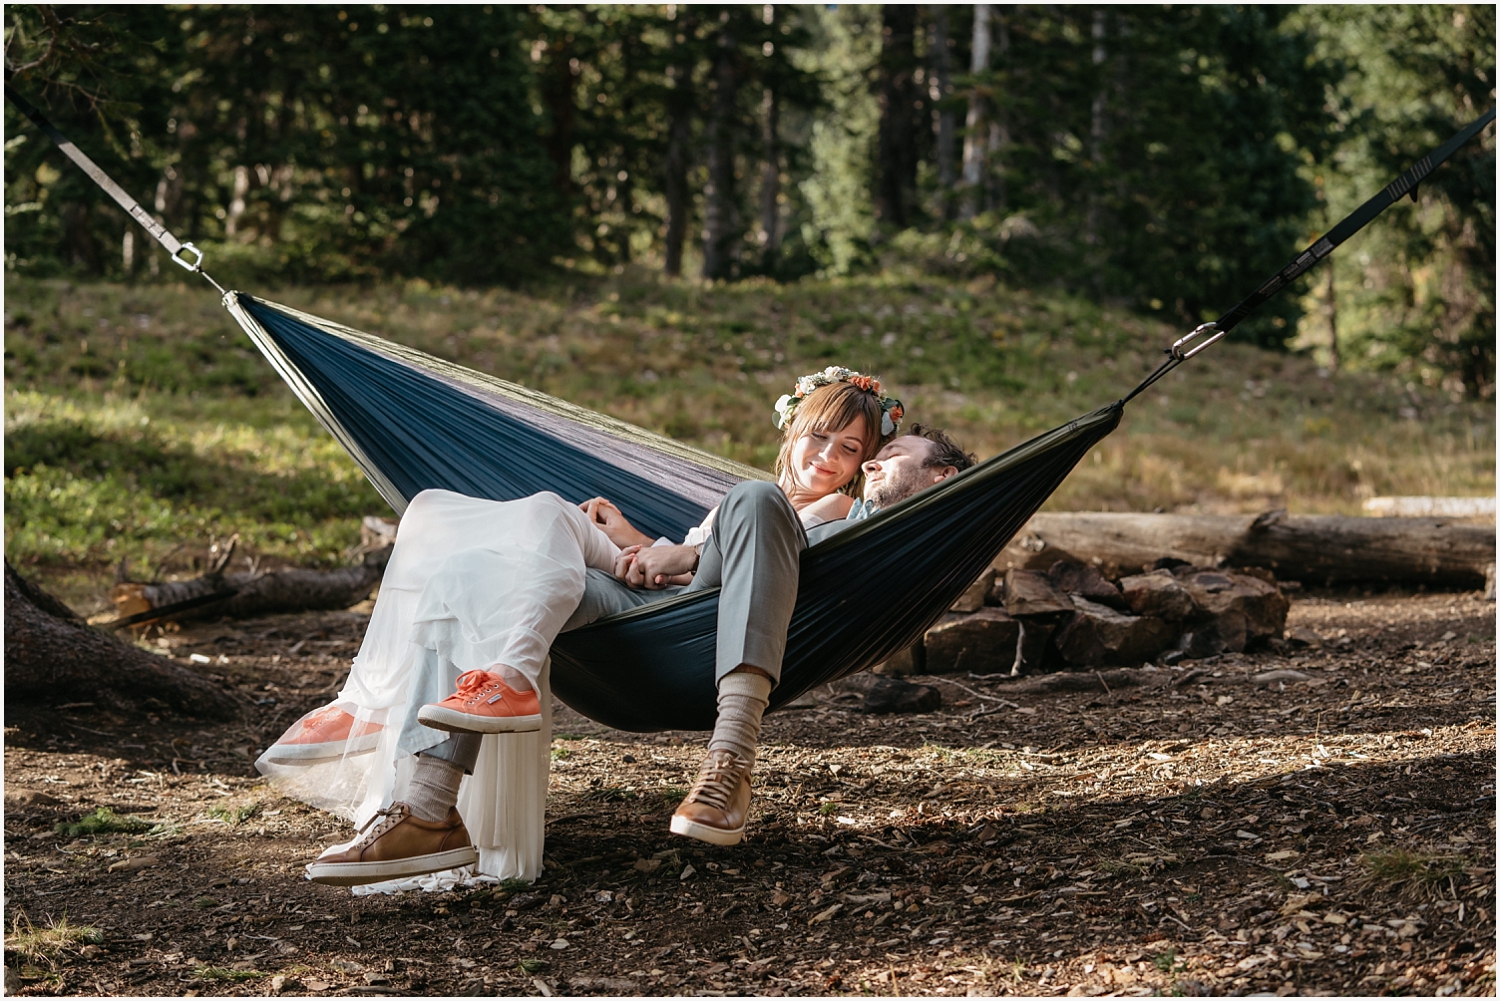 Bride and groom swing in hammock during their mountain elopement